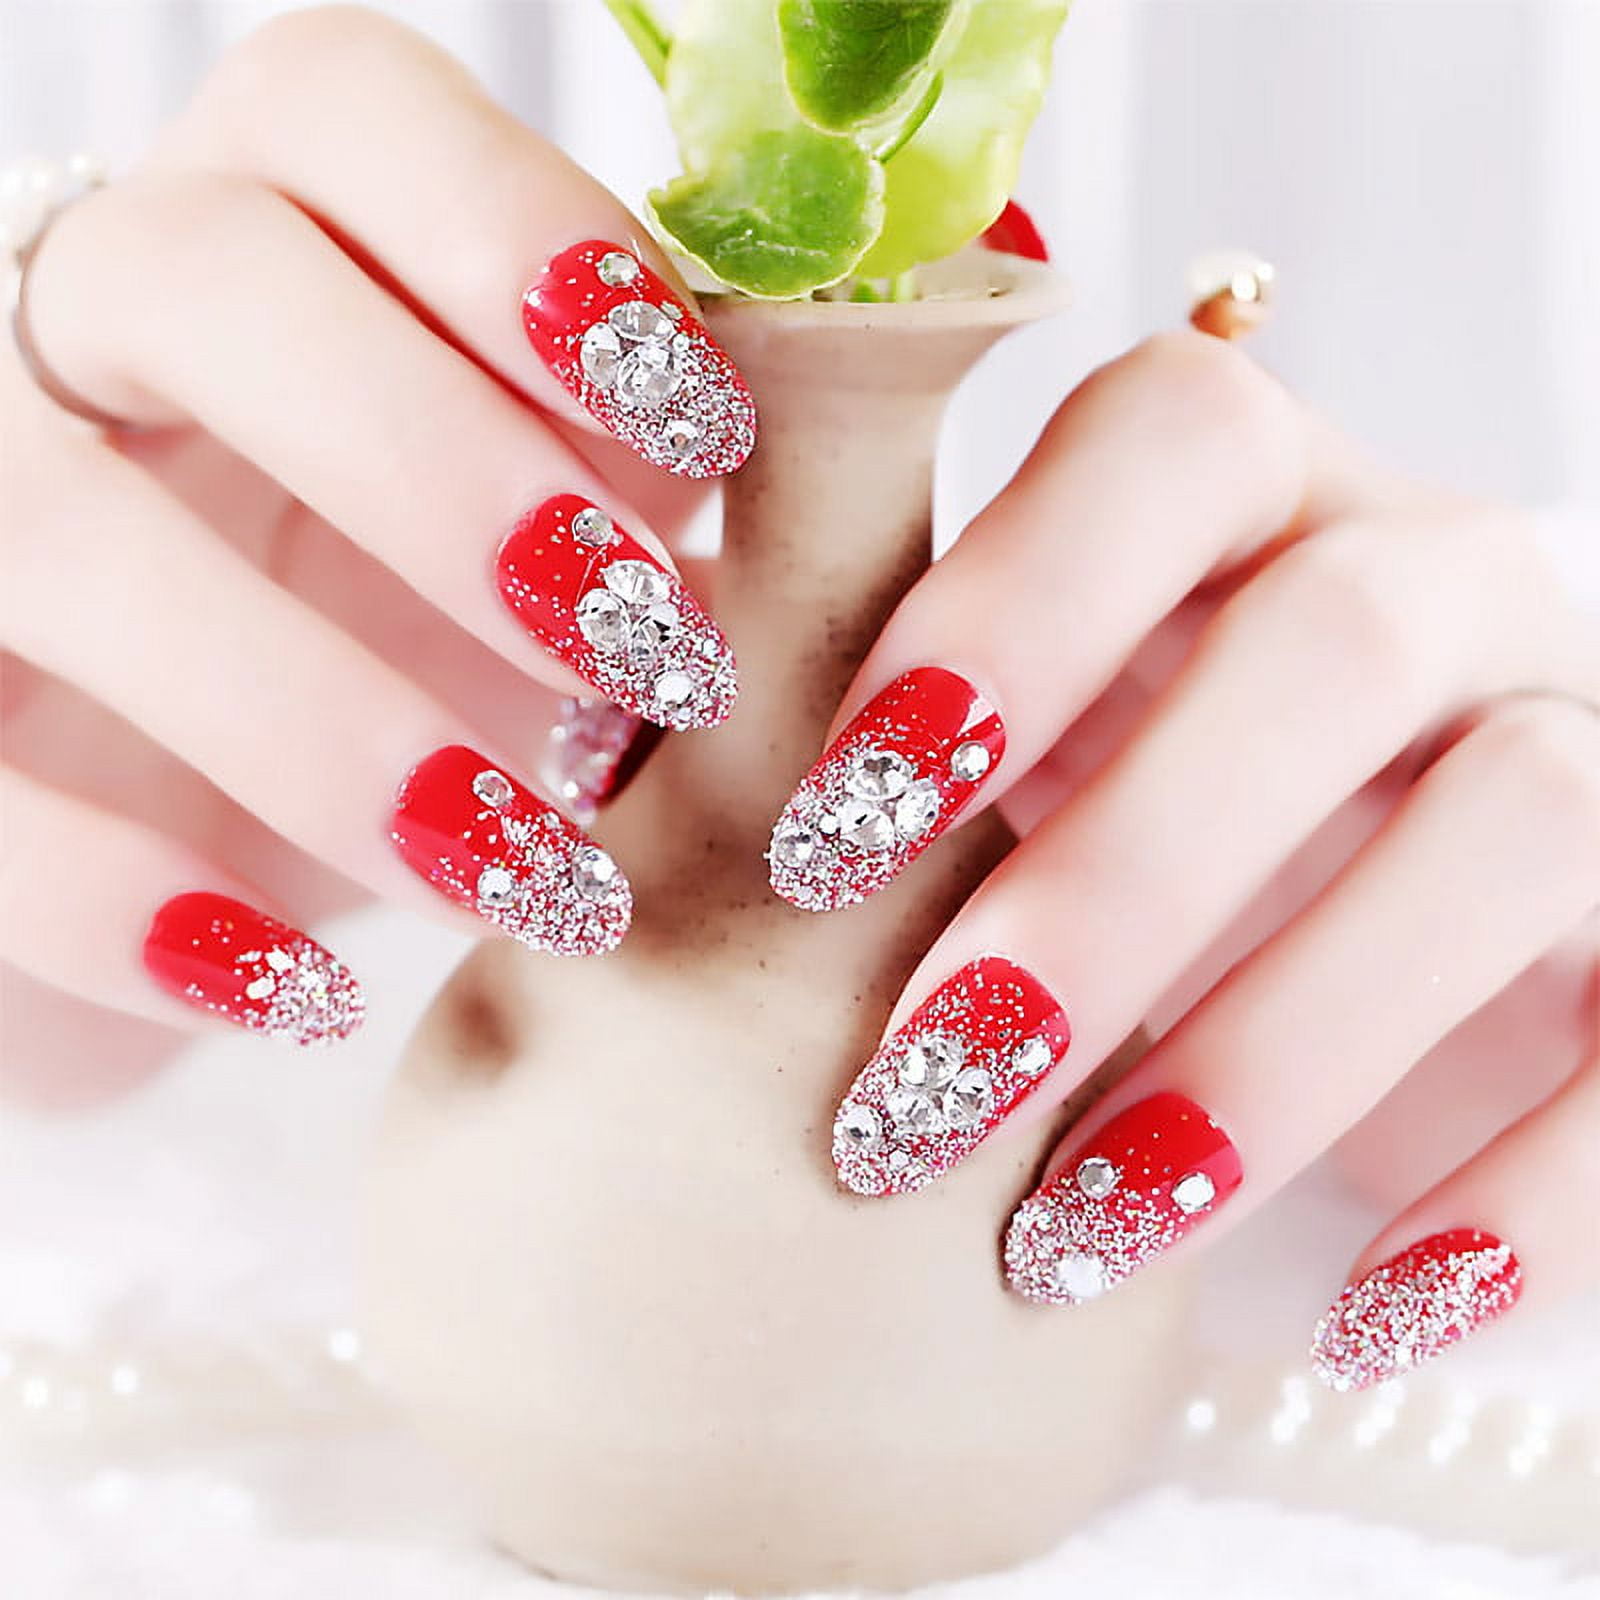 Red Gel Nails - Make Nails Red With Gel in 2022